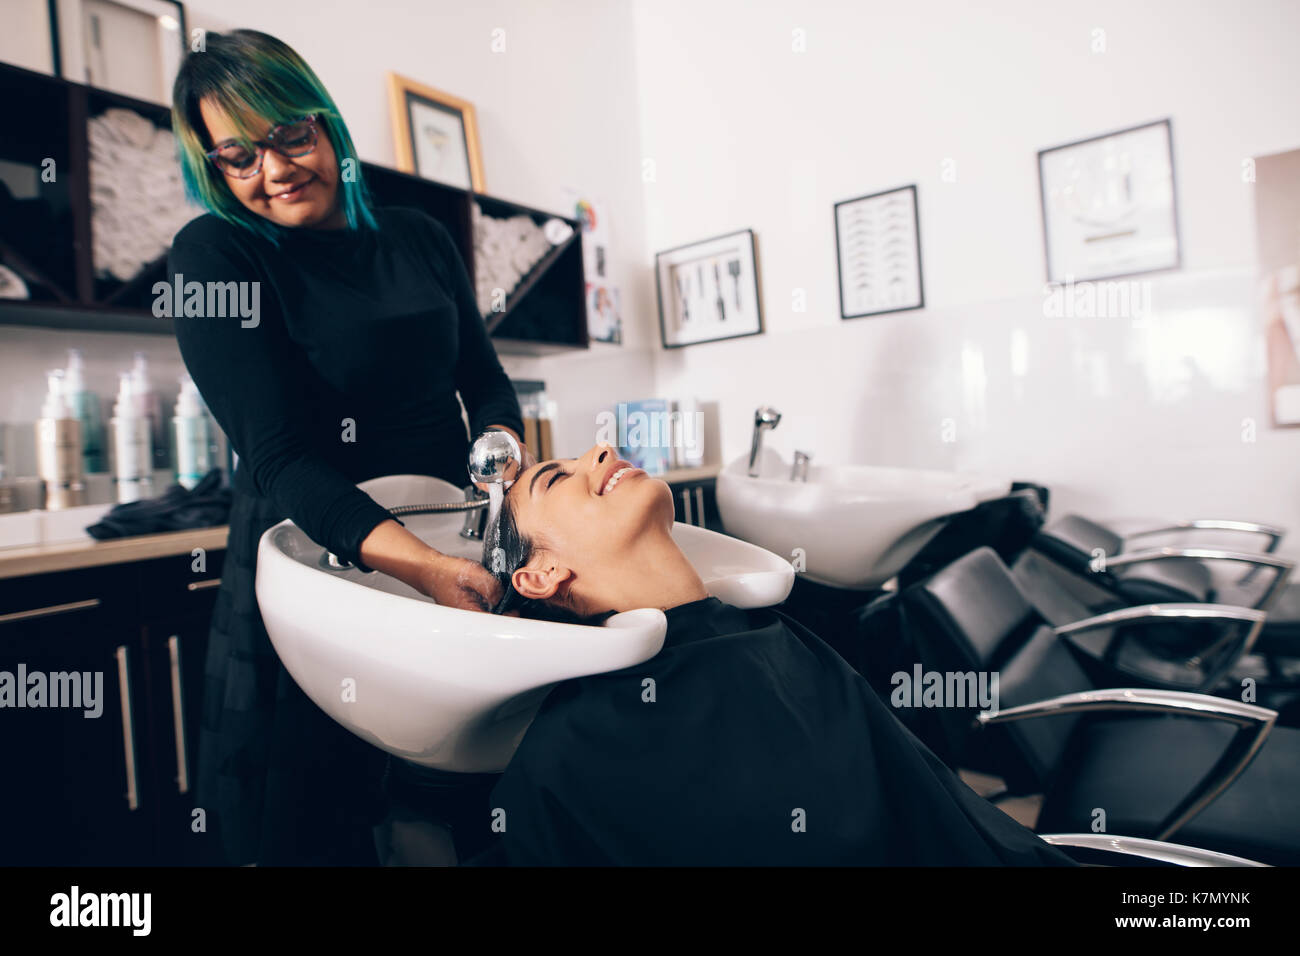 Female hairdresser rinsing hair of a customer . hairdresser washing hair to the customer before doing hairstyle Stock Photo